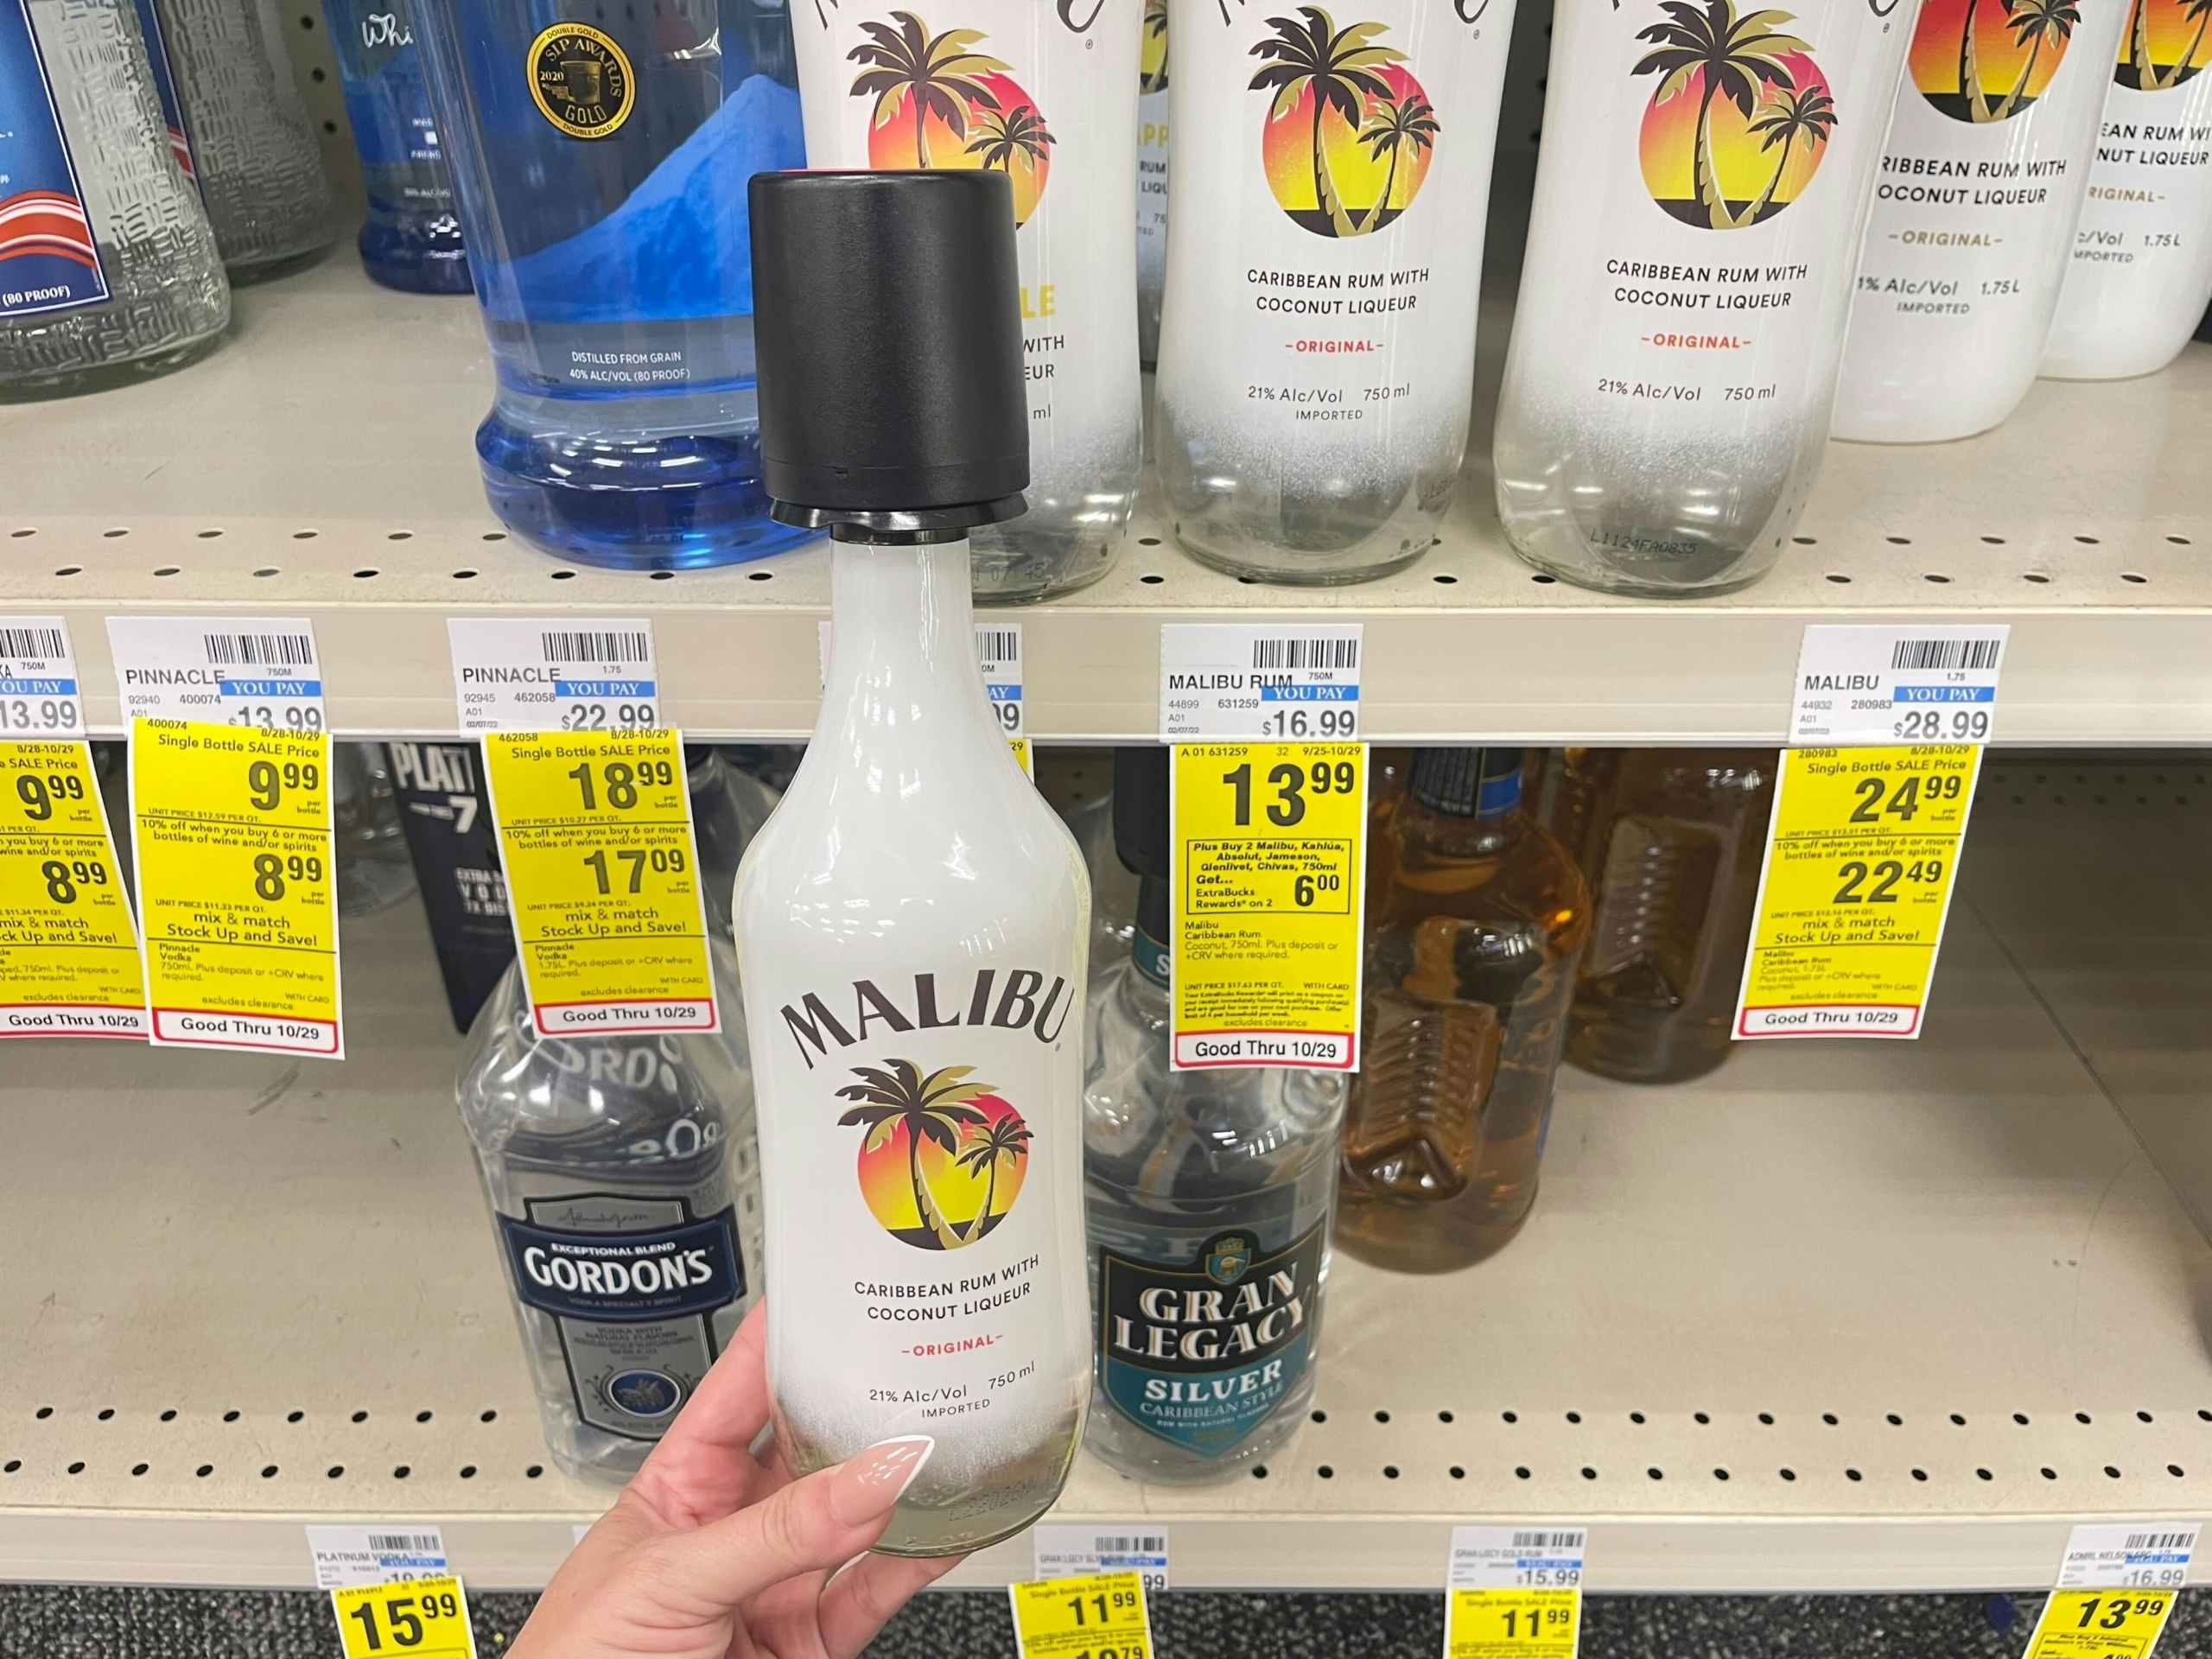 750ml bottle of malibu rum next to $13.99 sales tag at CVS